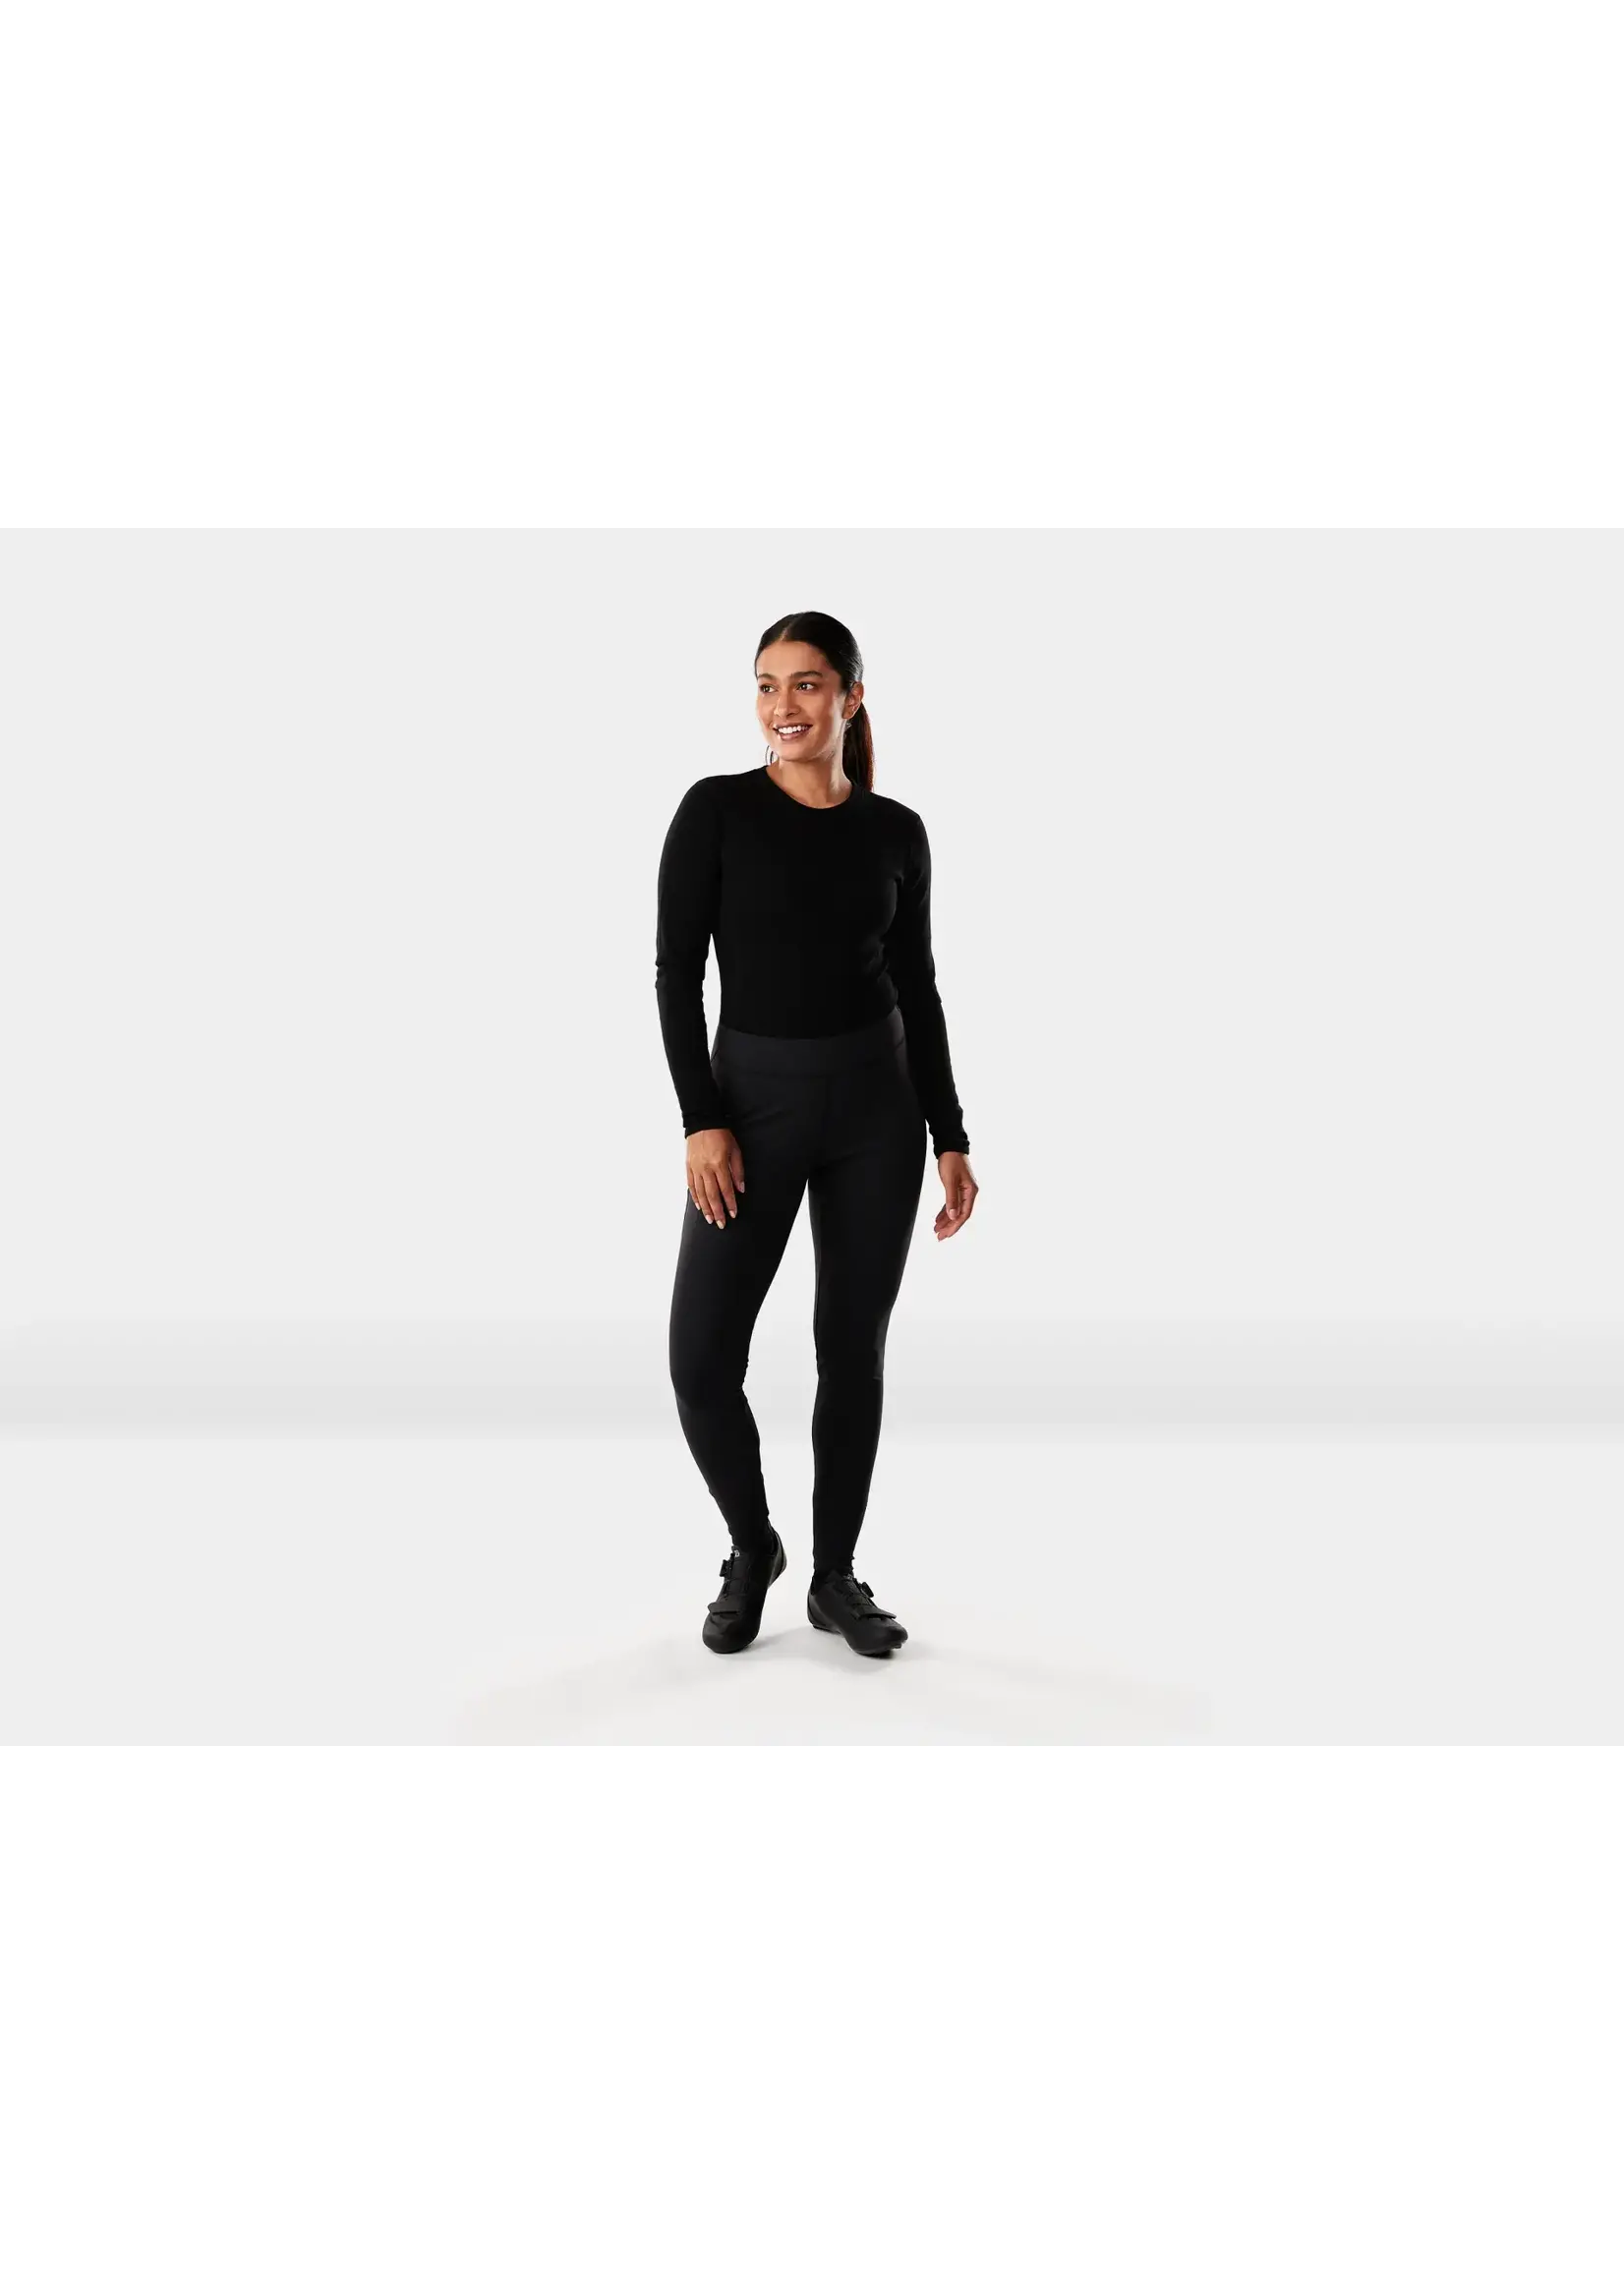 Women's Thermal Cycling Tight